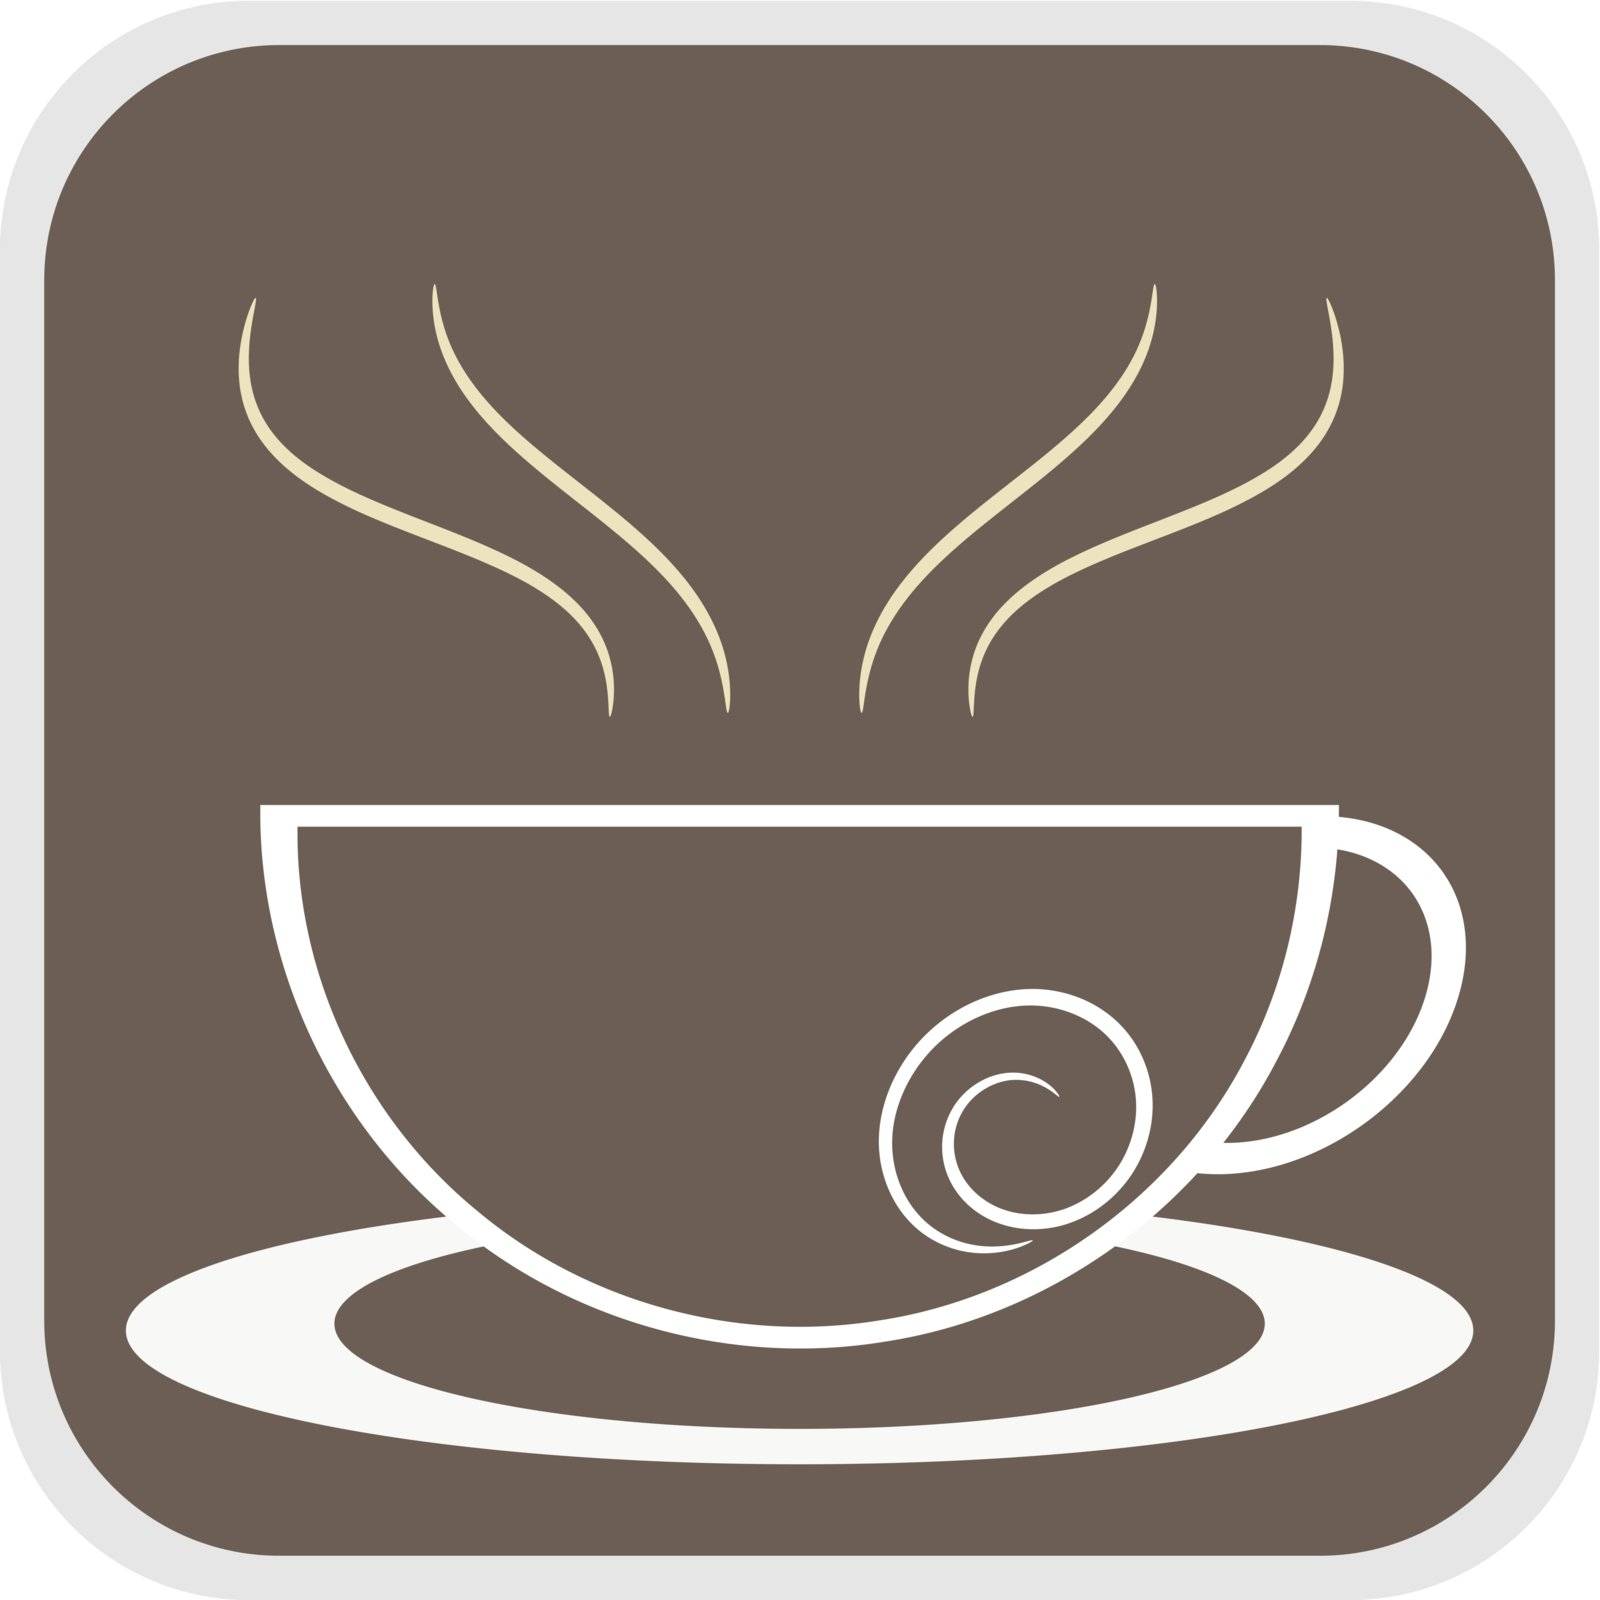 Coffee symbol sign in the brown background illustration